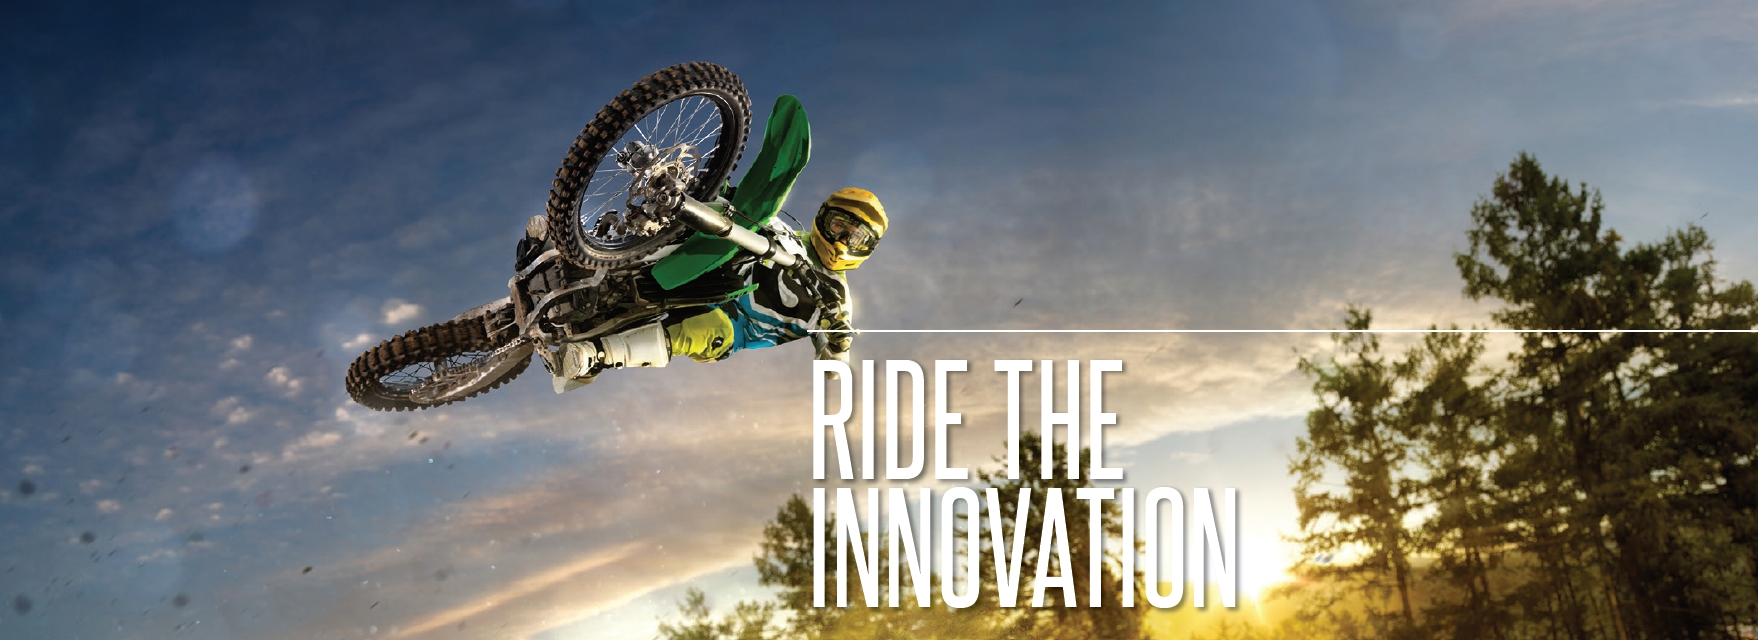 ride the innovation